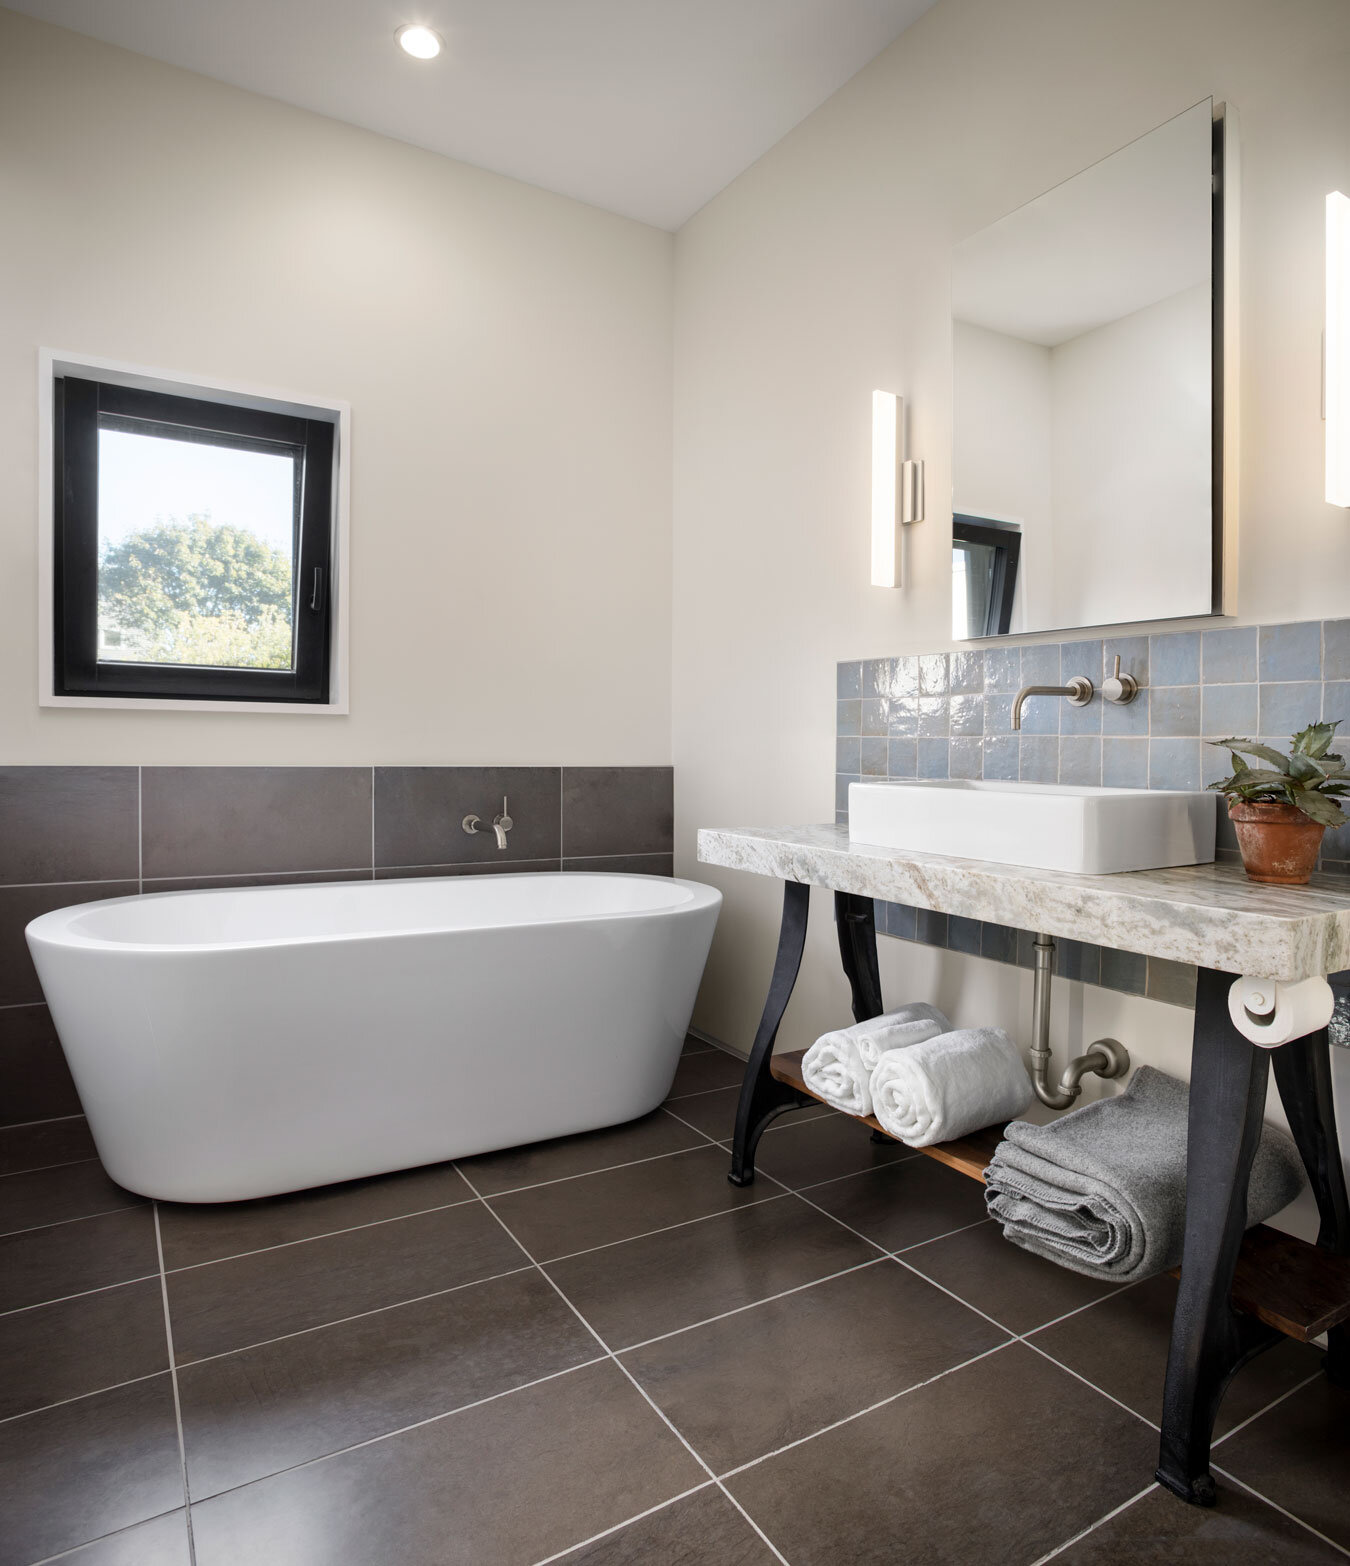  The master bath soaking tub is paired with a console made from vintage worktable legs, found on Etsy, and a natural stone countertop. 